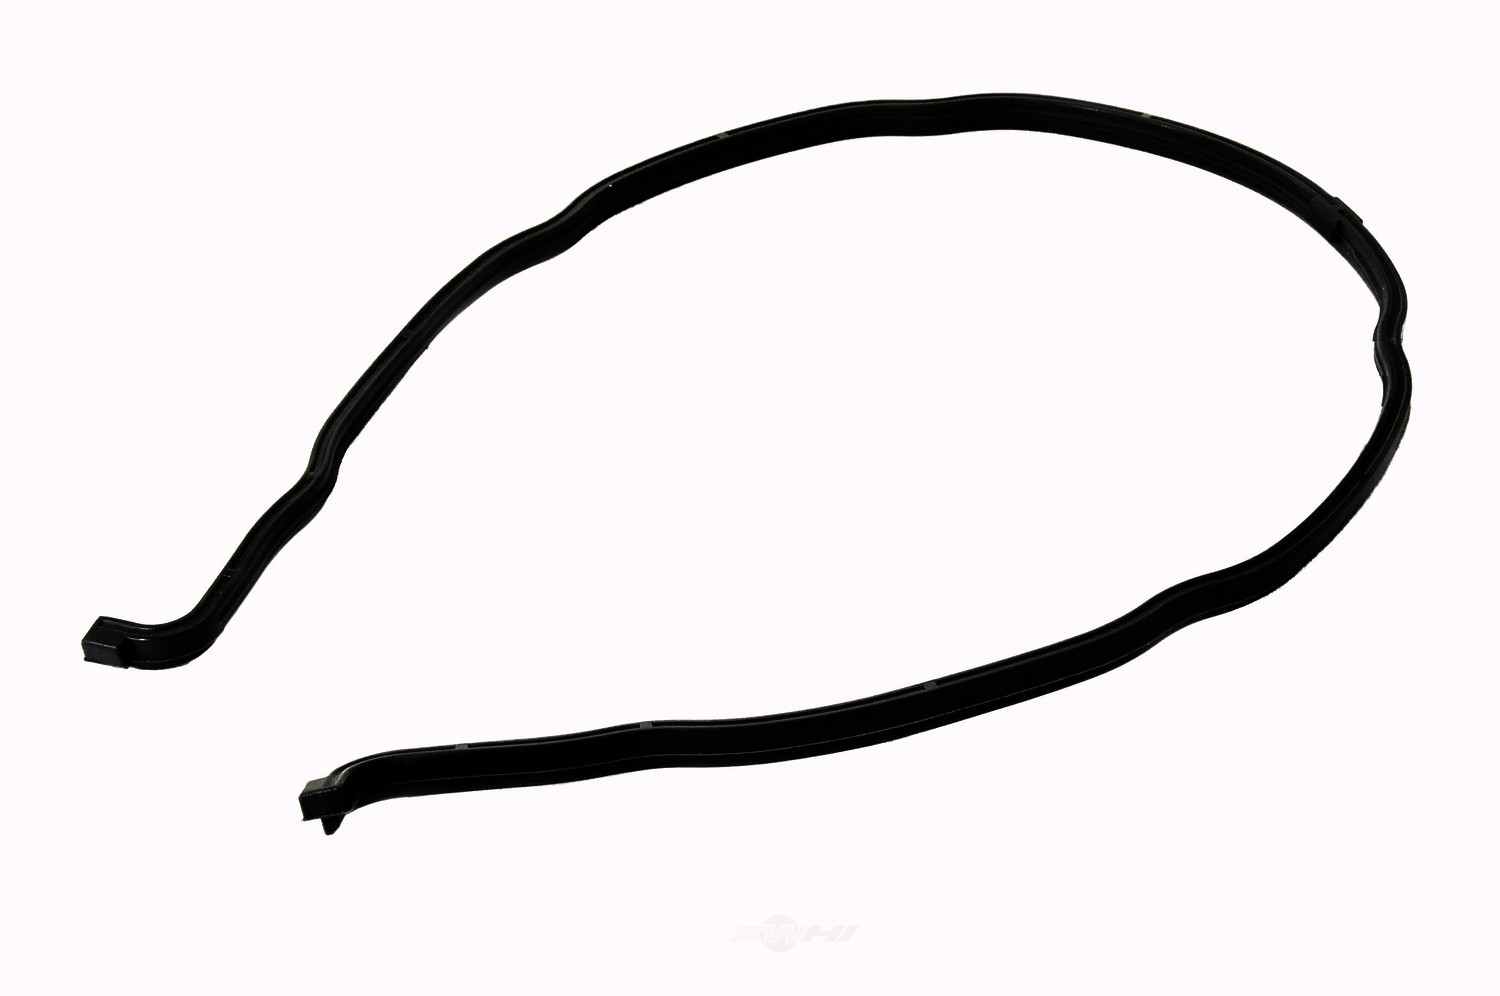 GM GENUINE PARTS - Engine Timing Cover Gasket - GMP 10198910